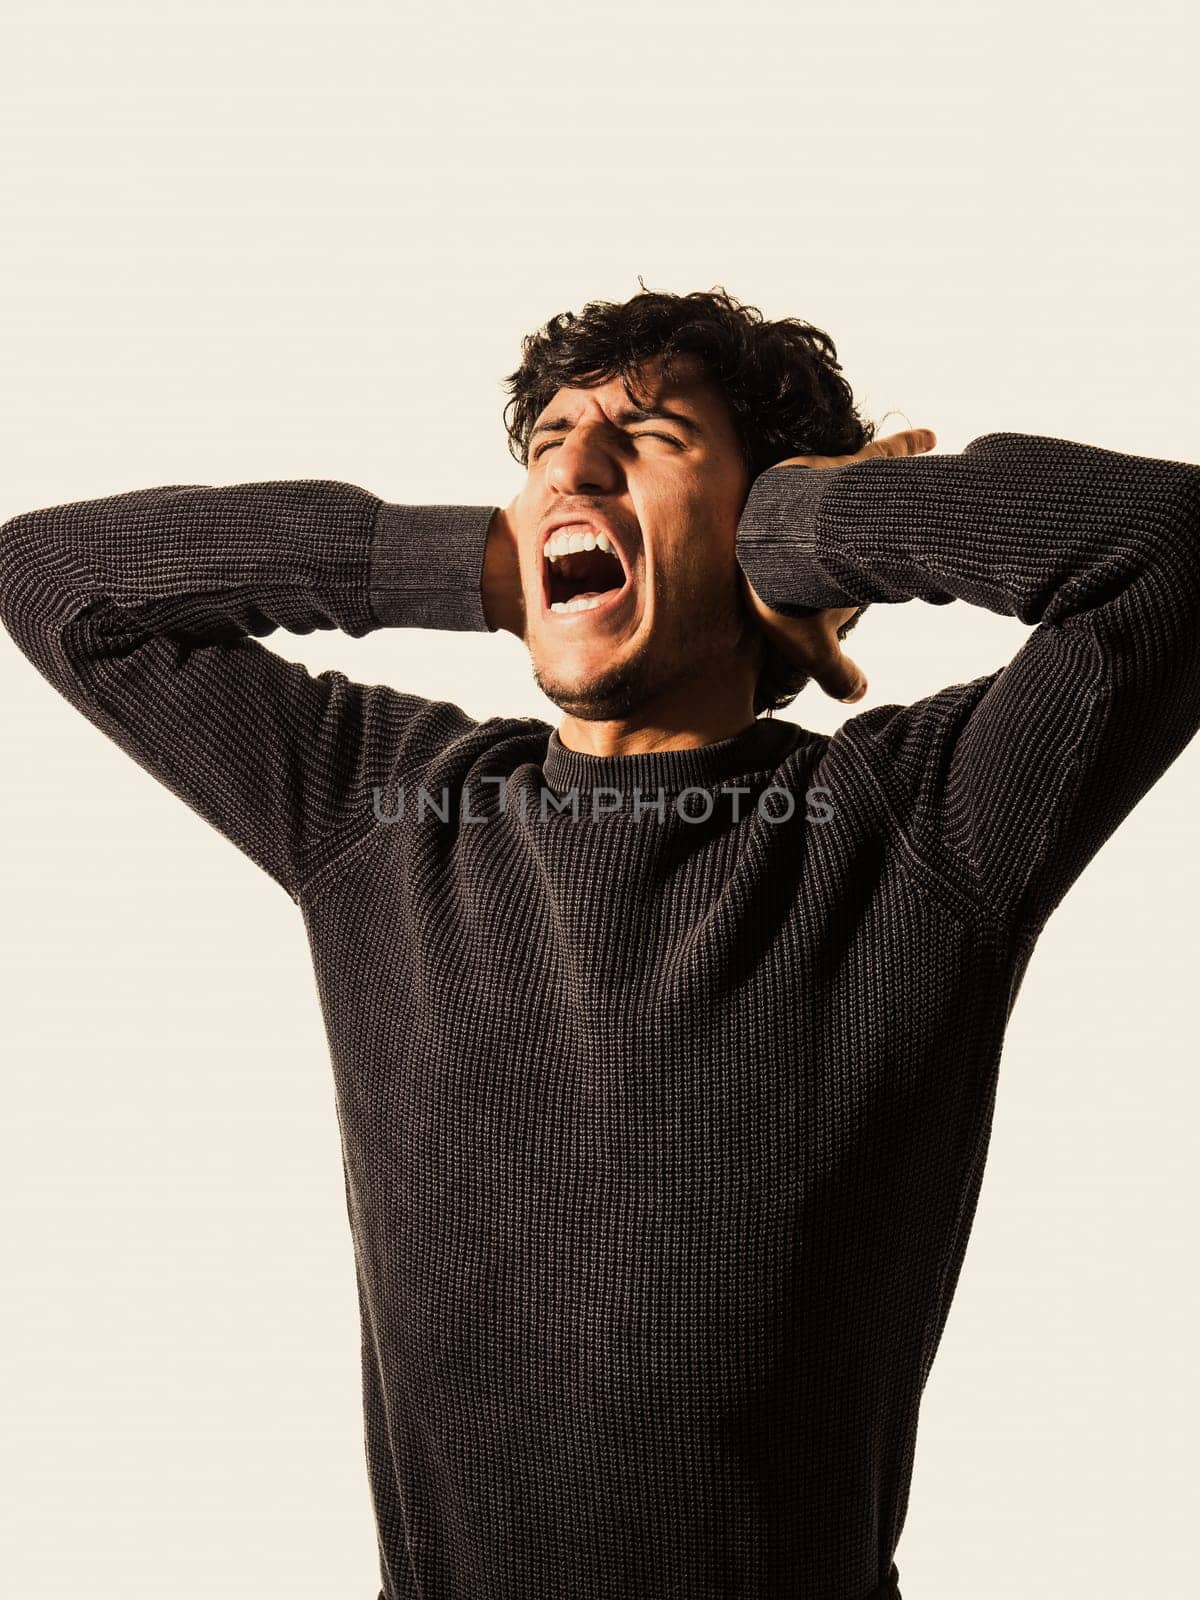 A young man with his hands on his ears, screaming and yelling in despair or frustration